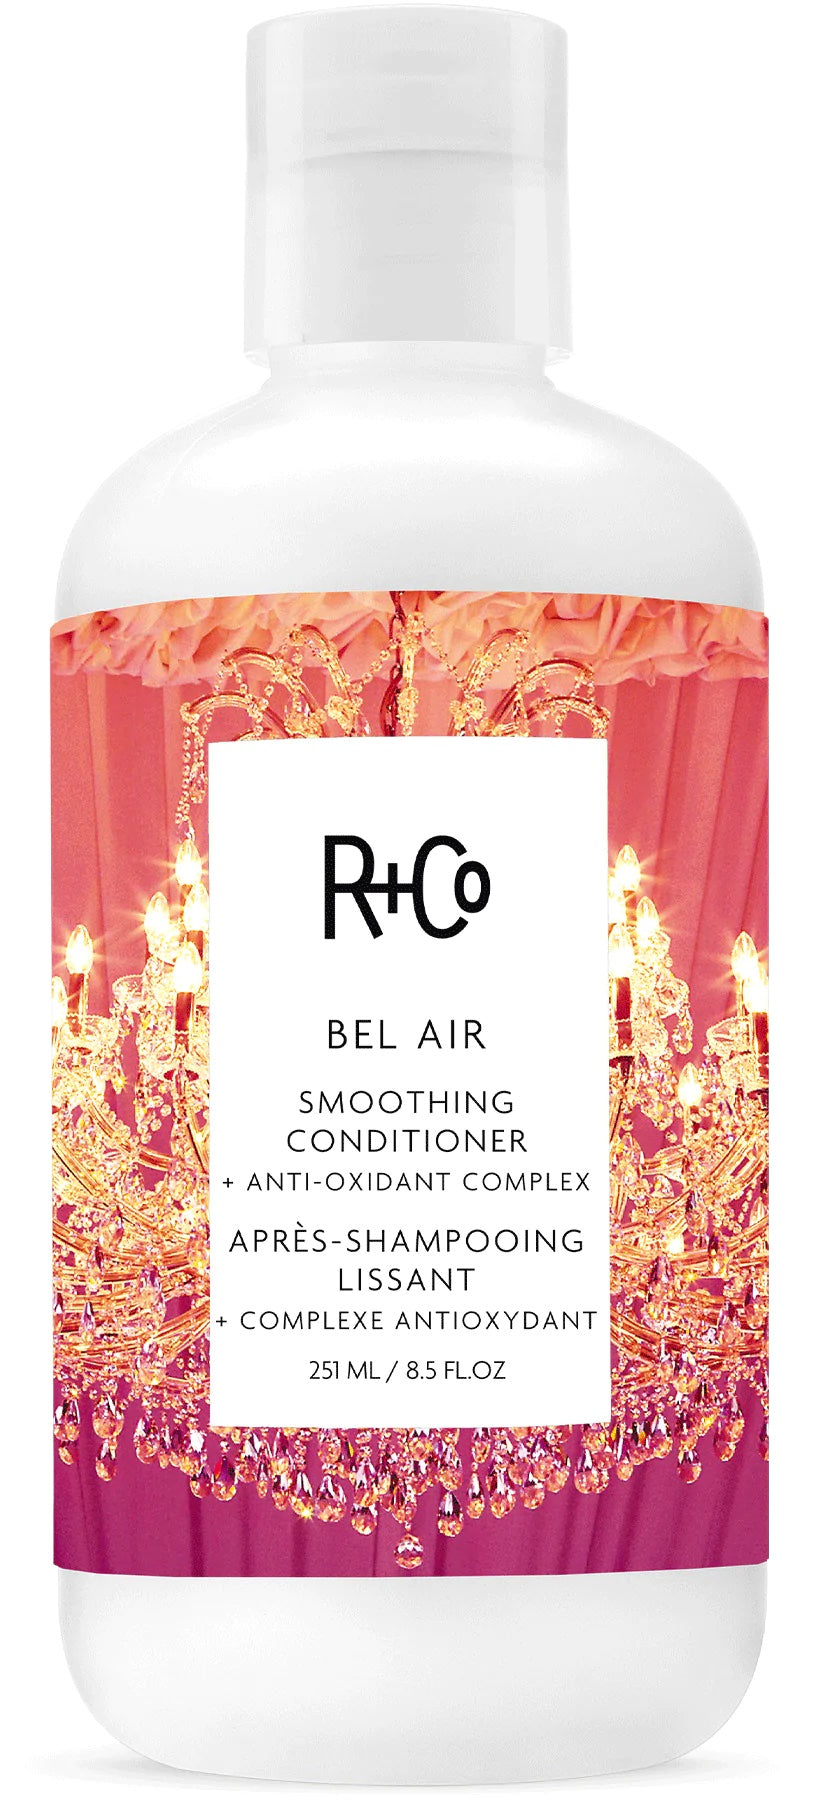 Bel-Air Smoothing Conditioner + Anti-Oxidant Complex